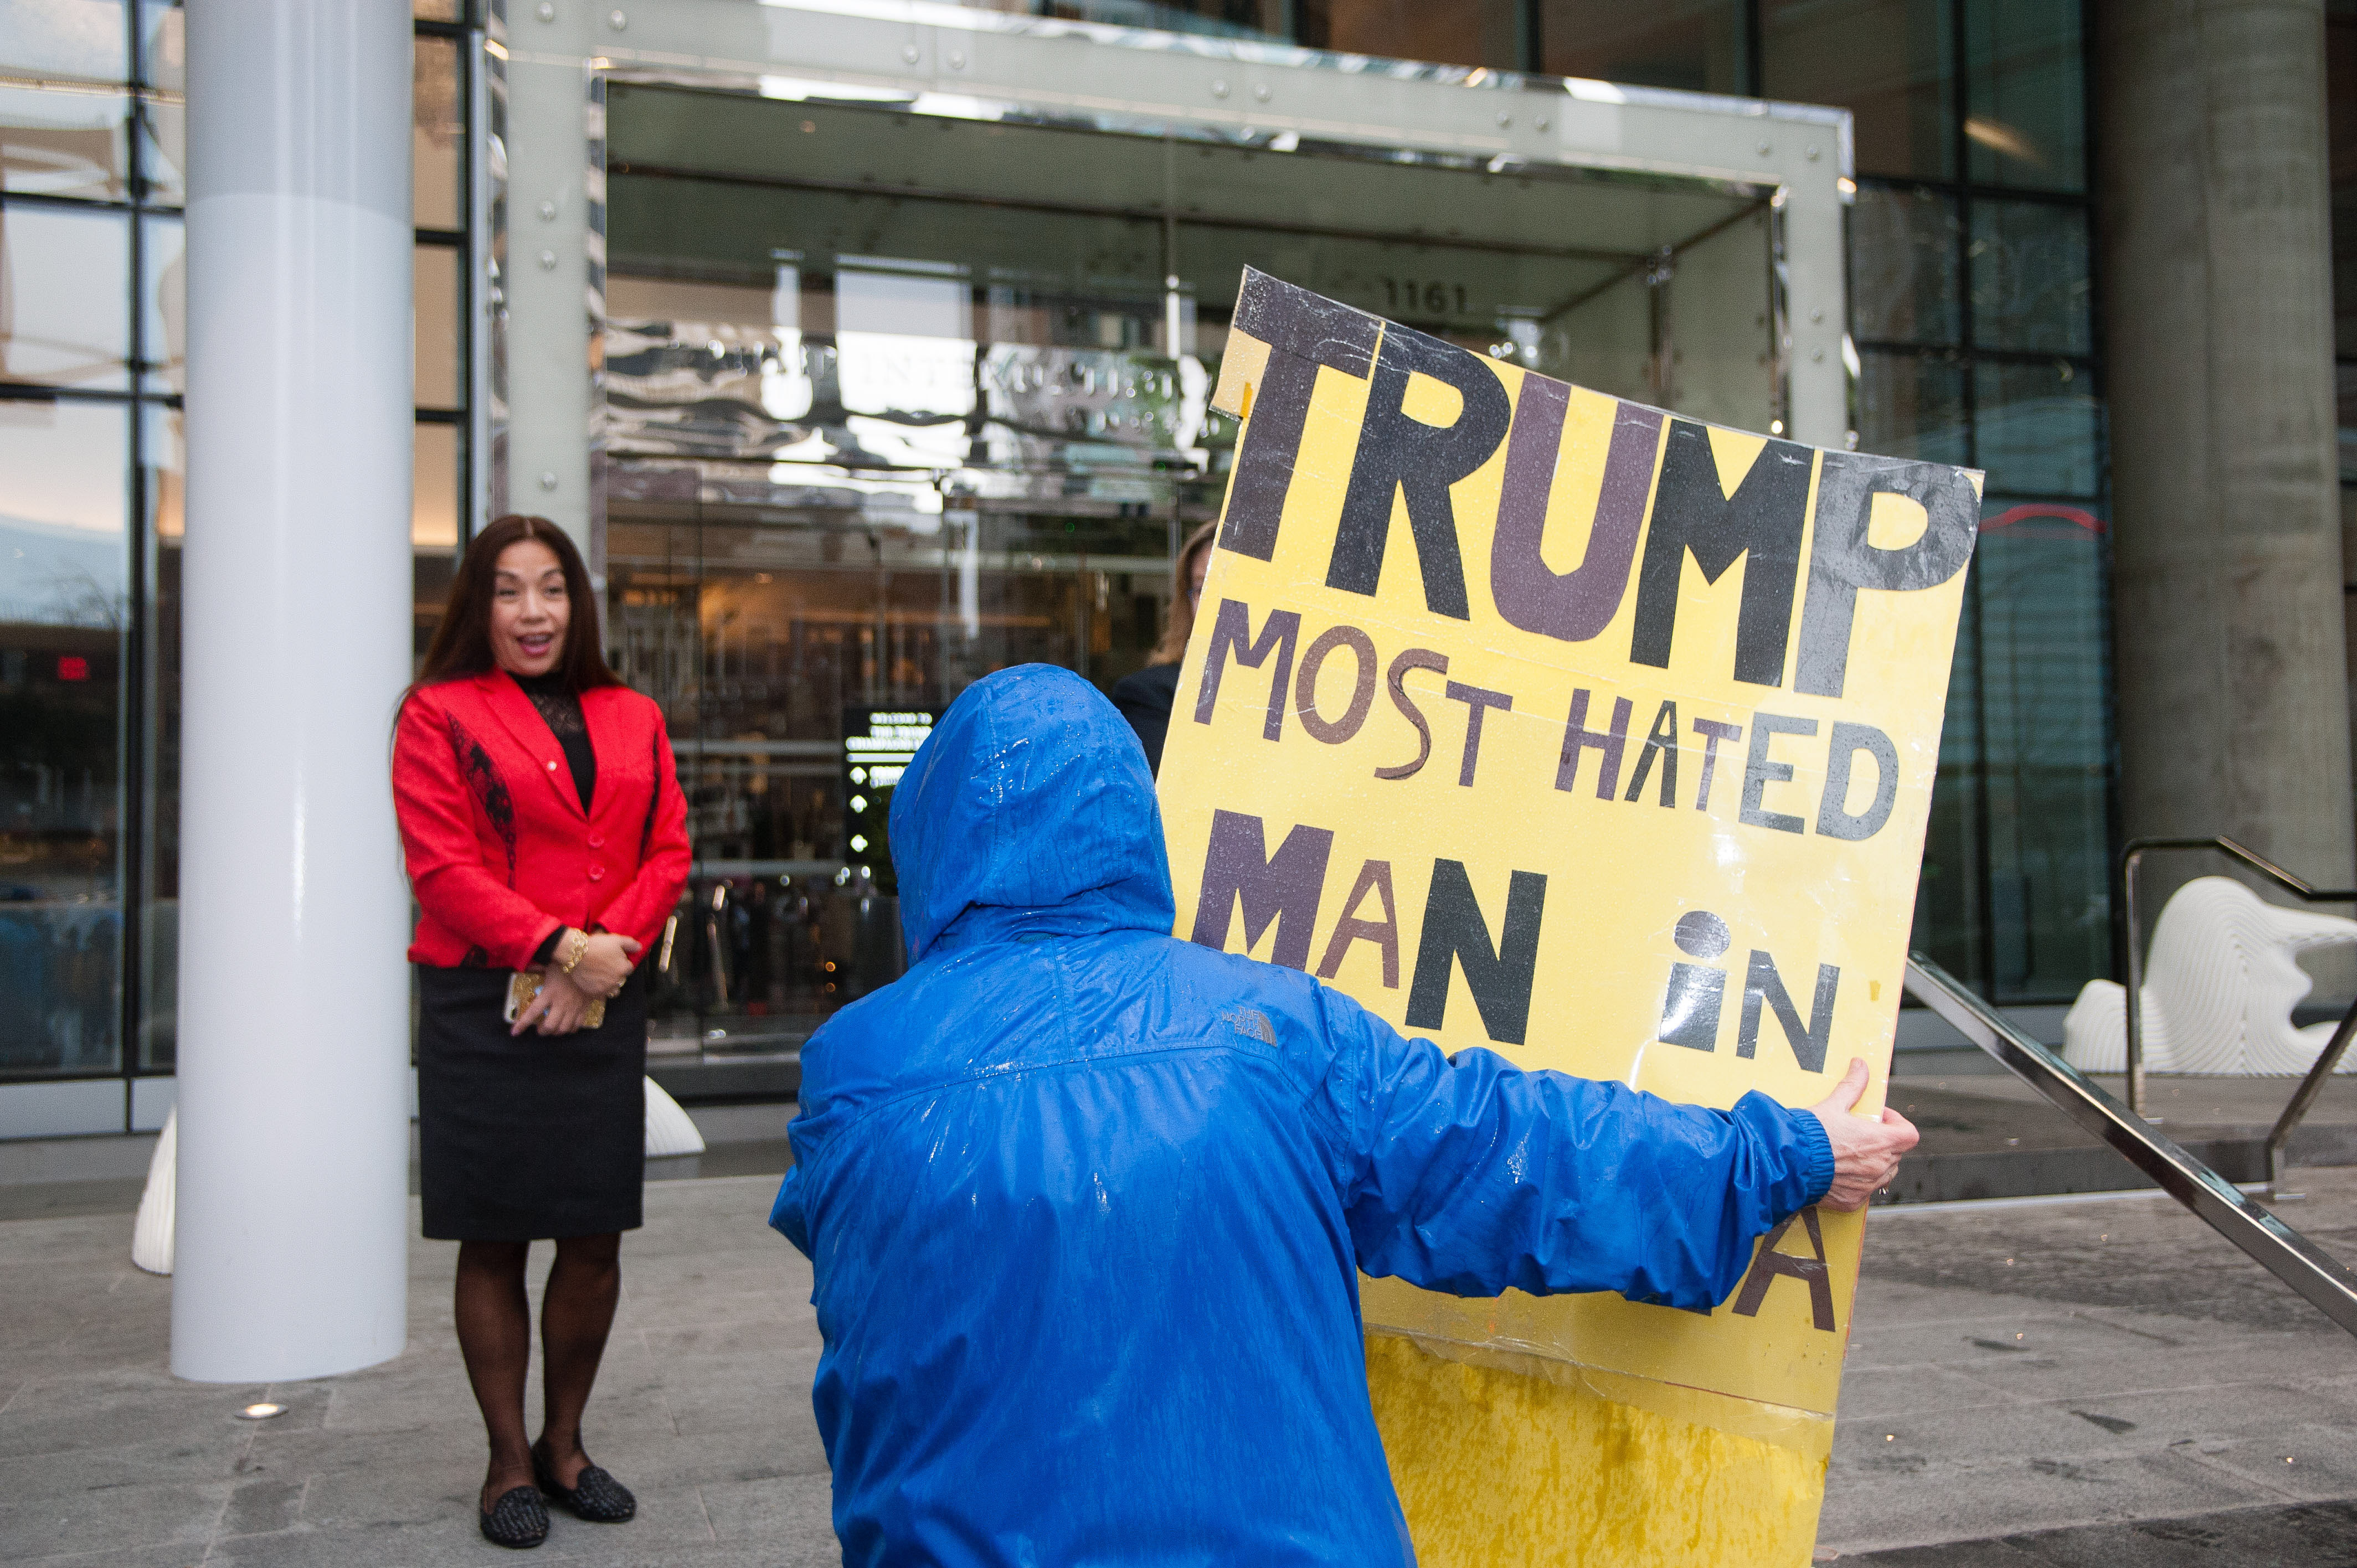 A Trump Tower patron argues with demonstrators.